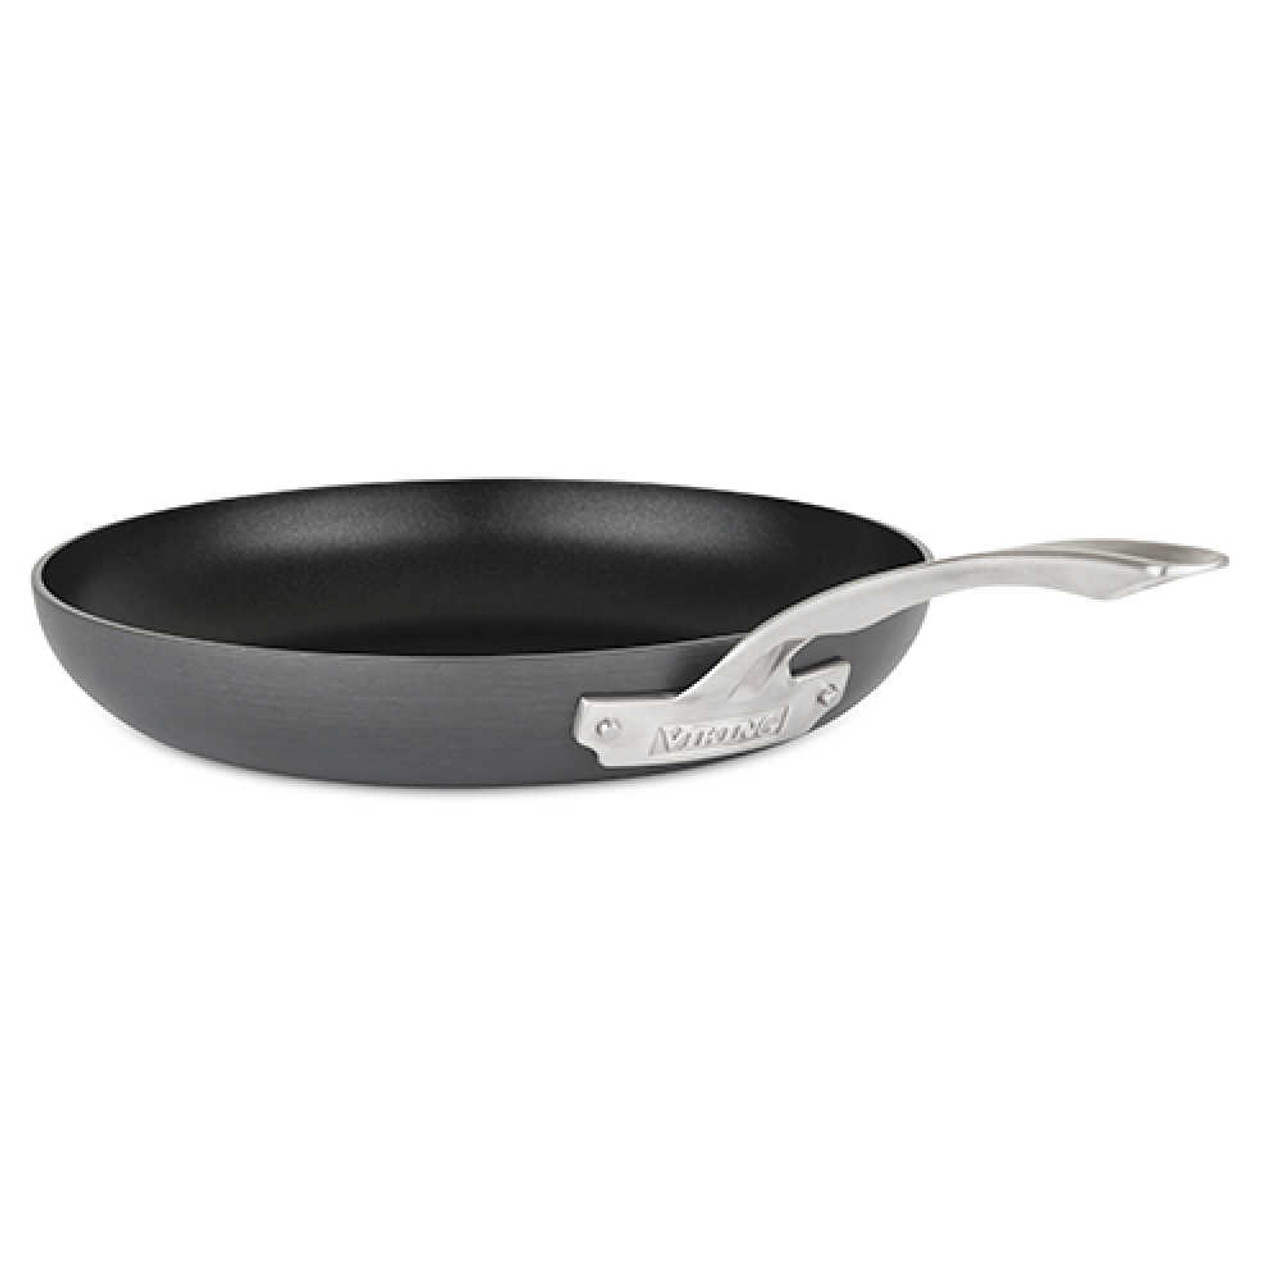 https://cdn11.bigcommerce.com/s-hccytny0od/images/stencil/1280x1280/products/4814/19716/Viking_Hard_Anodized_Nonstick_12-Inch_Fry_Pan__55231.1656109546.jpg?c=2?imbypass=on